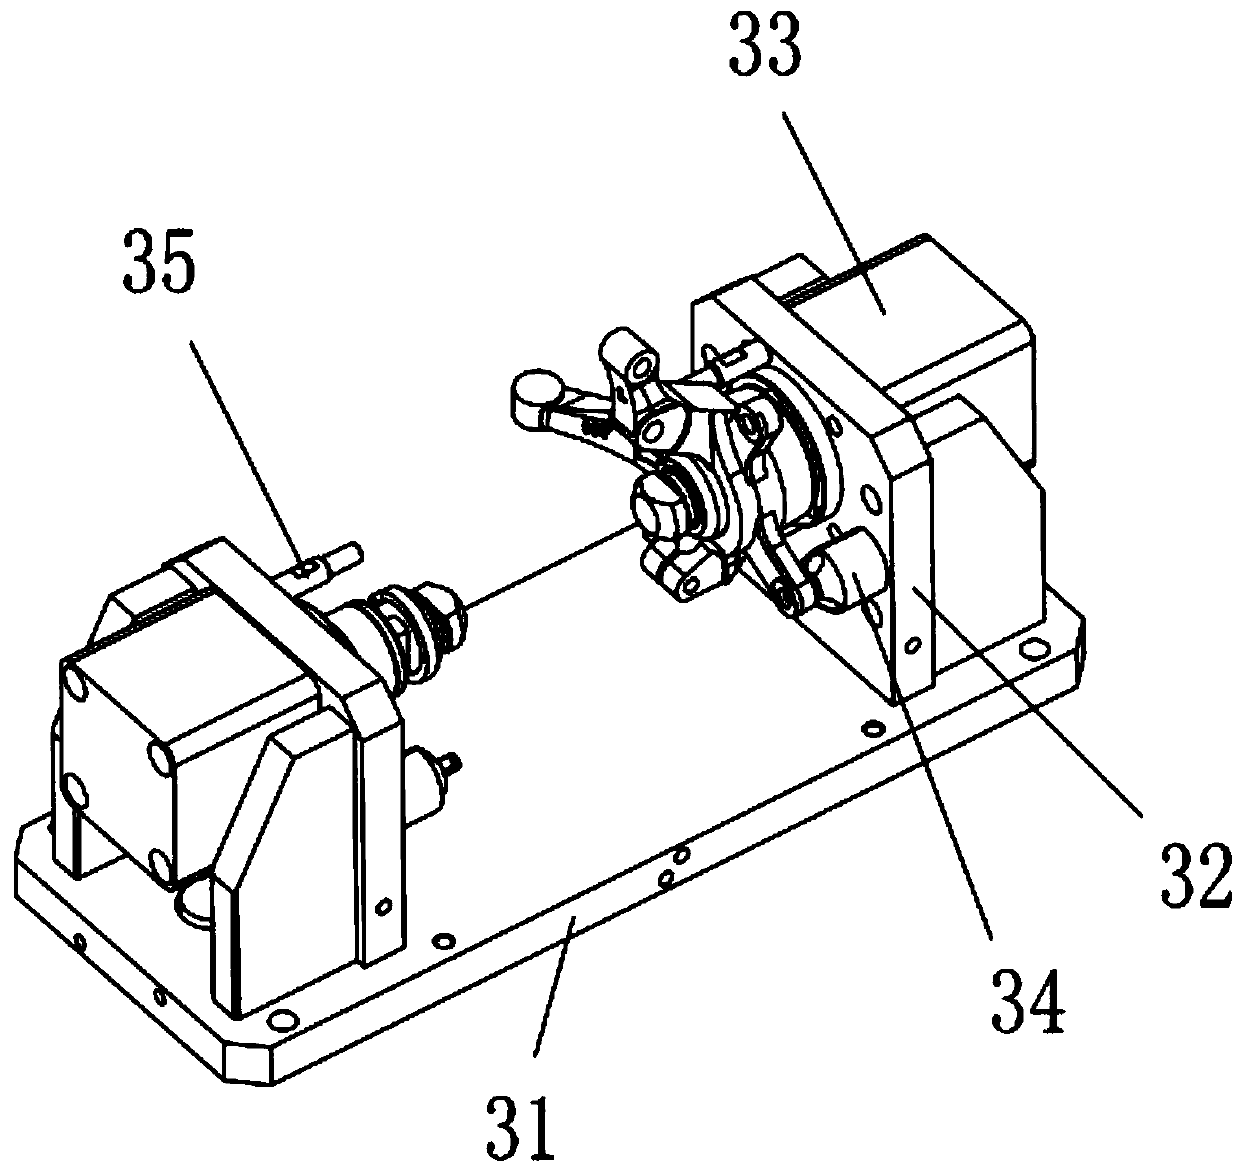 Lateral clamping turnover machining mechanism for steering knuckles